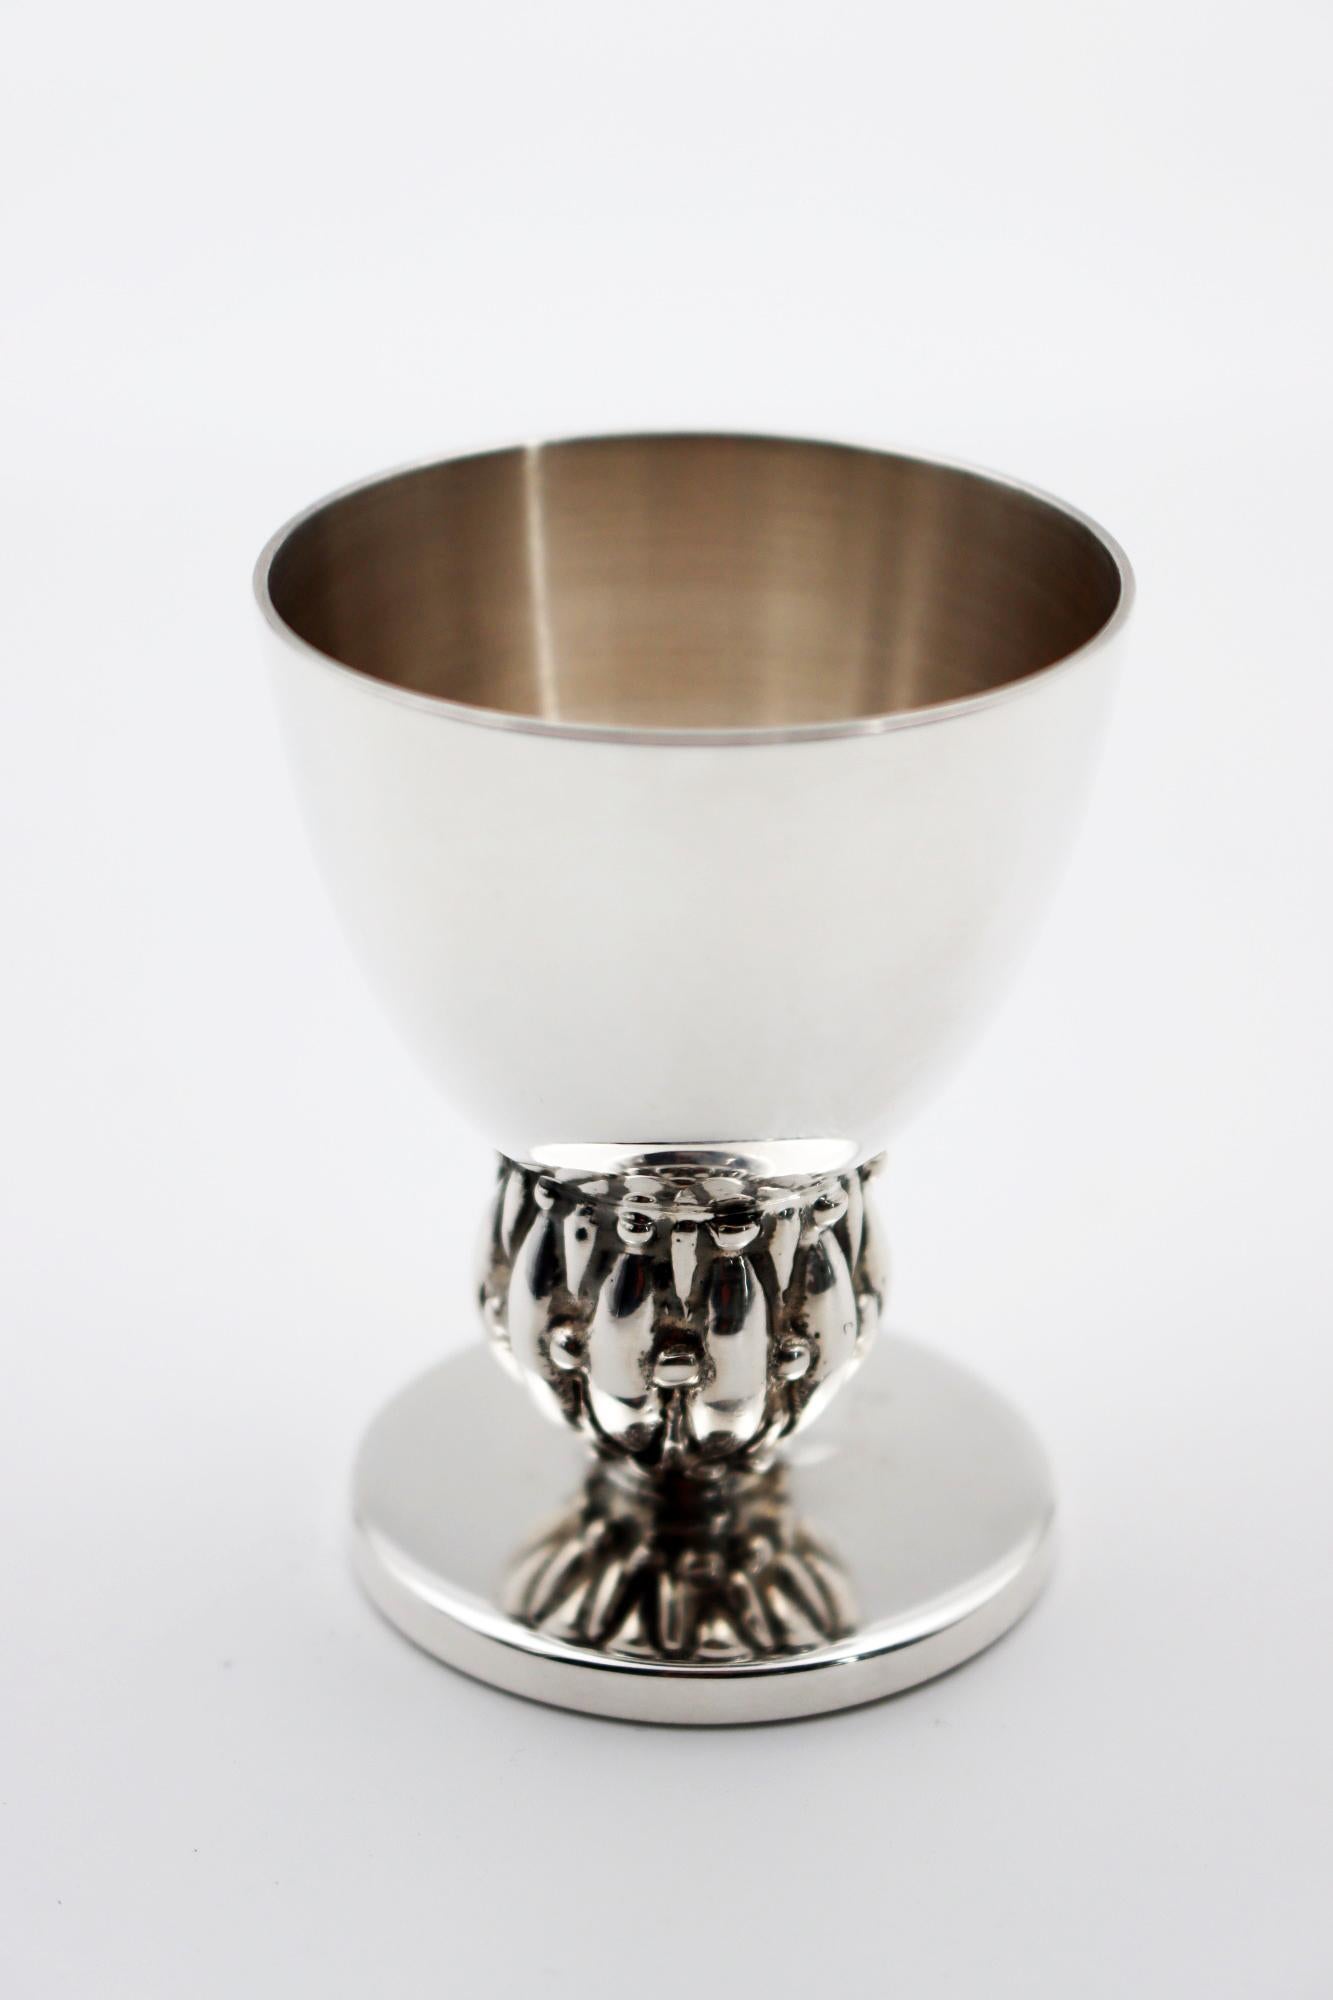 Silver bronze Egg cup

Silver plated bronze egg cup 35/42 microns 
Measures: H: 58 mm, D: 45 mm

This egg cup is the handmade work of French designer Richard Lauret.

These pieces are unique or made to order.

The products can be